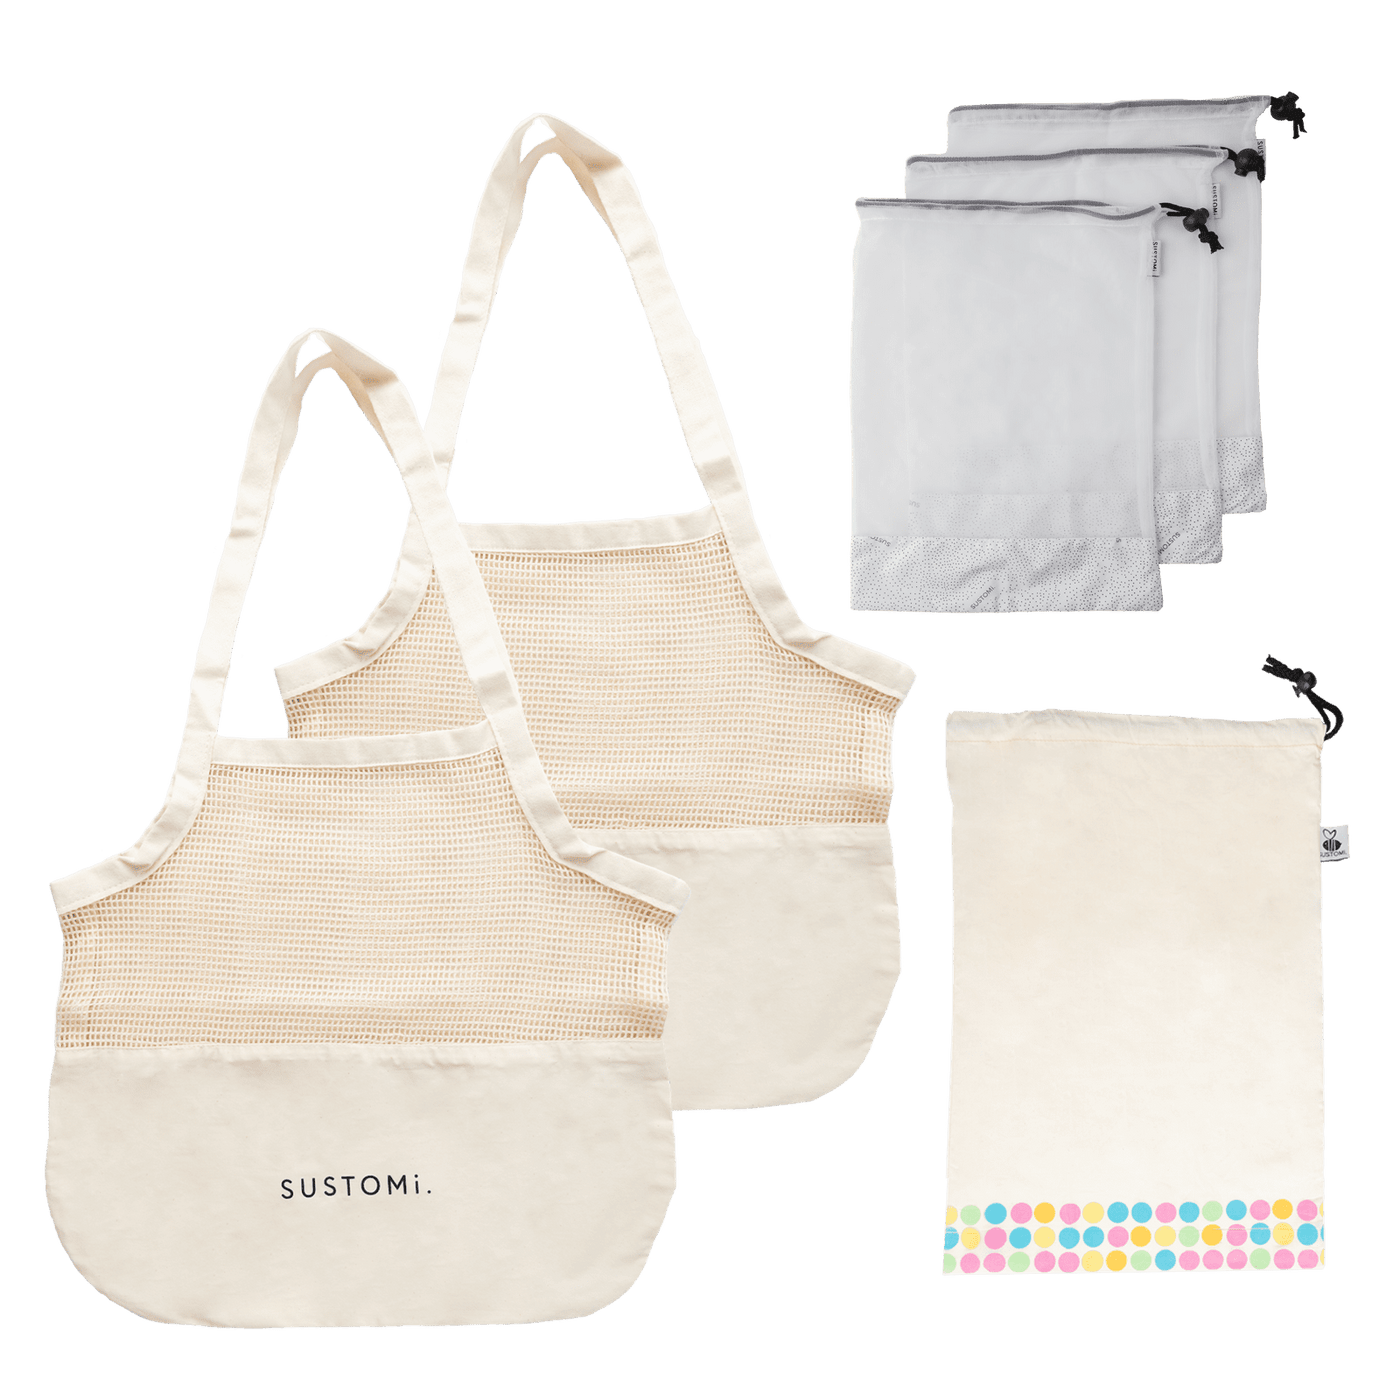 plastic-free shopping bags bundle by sustomi